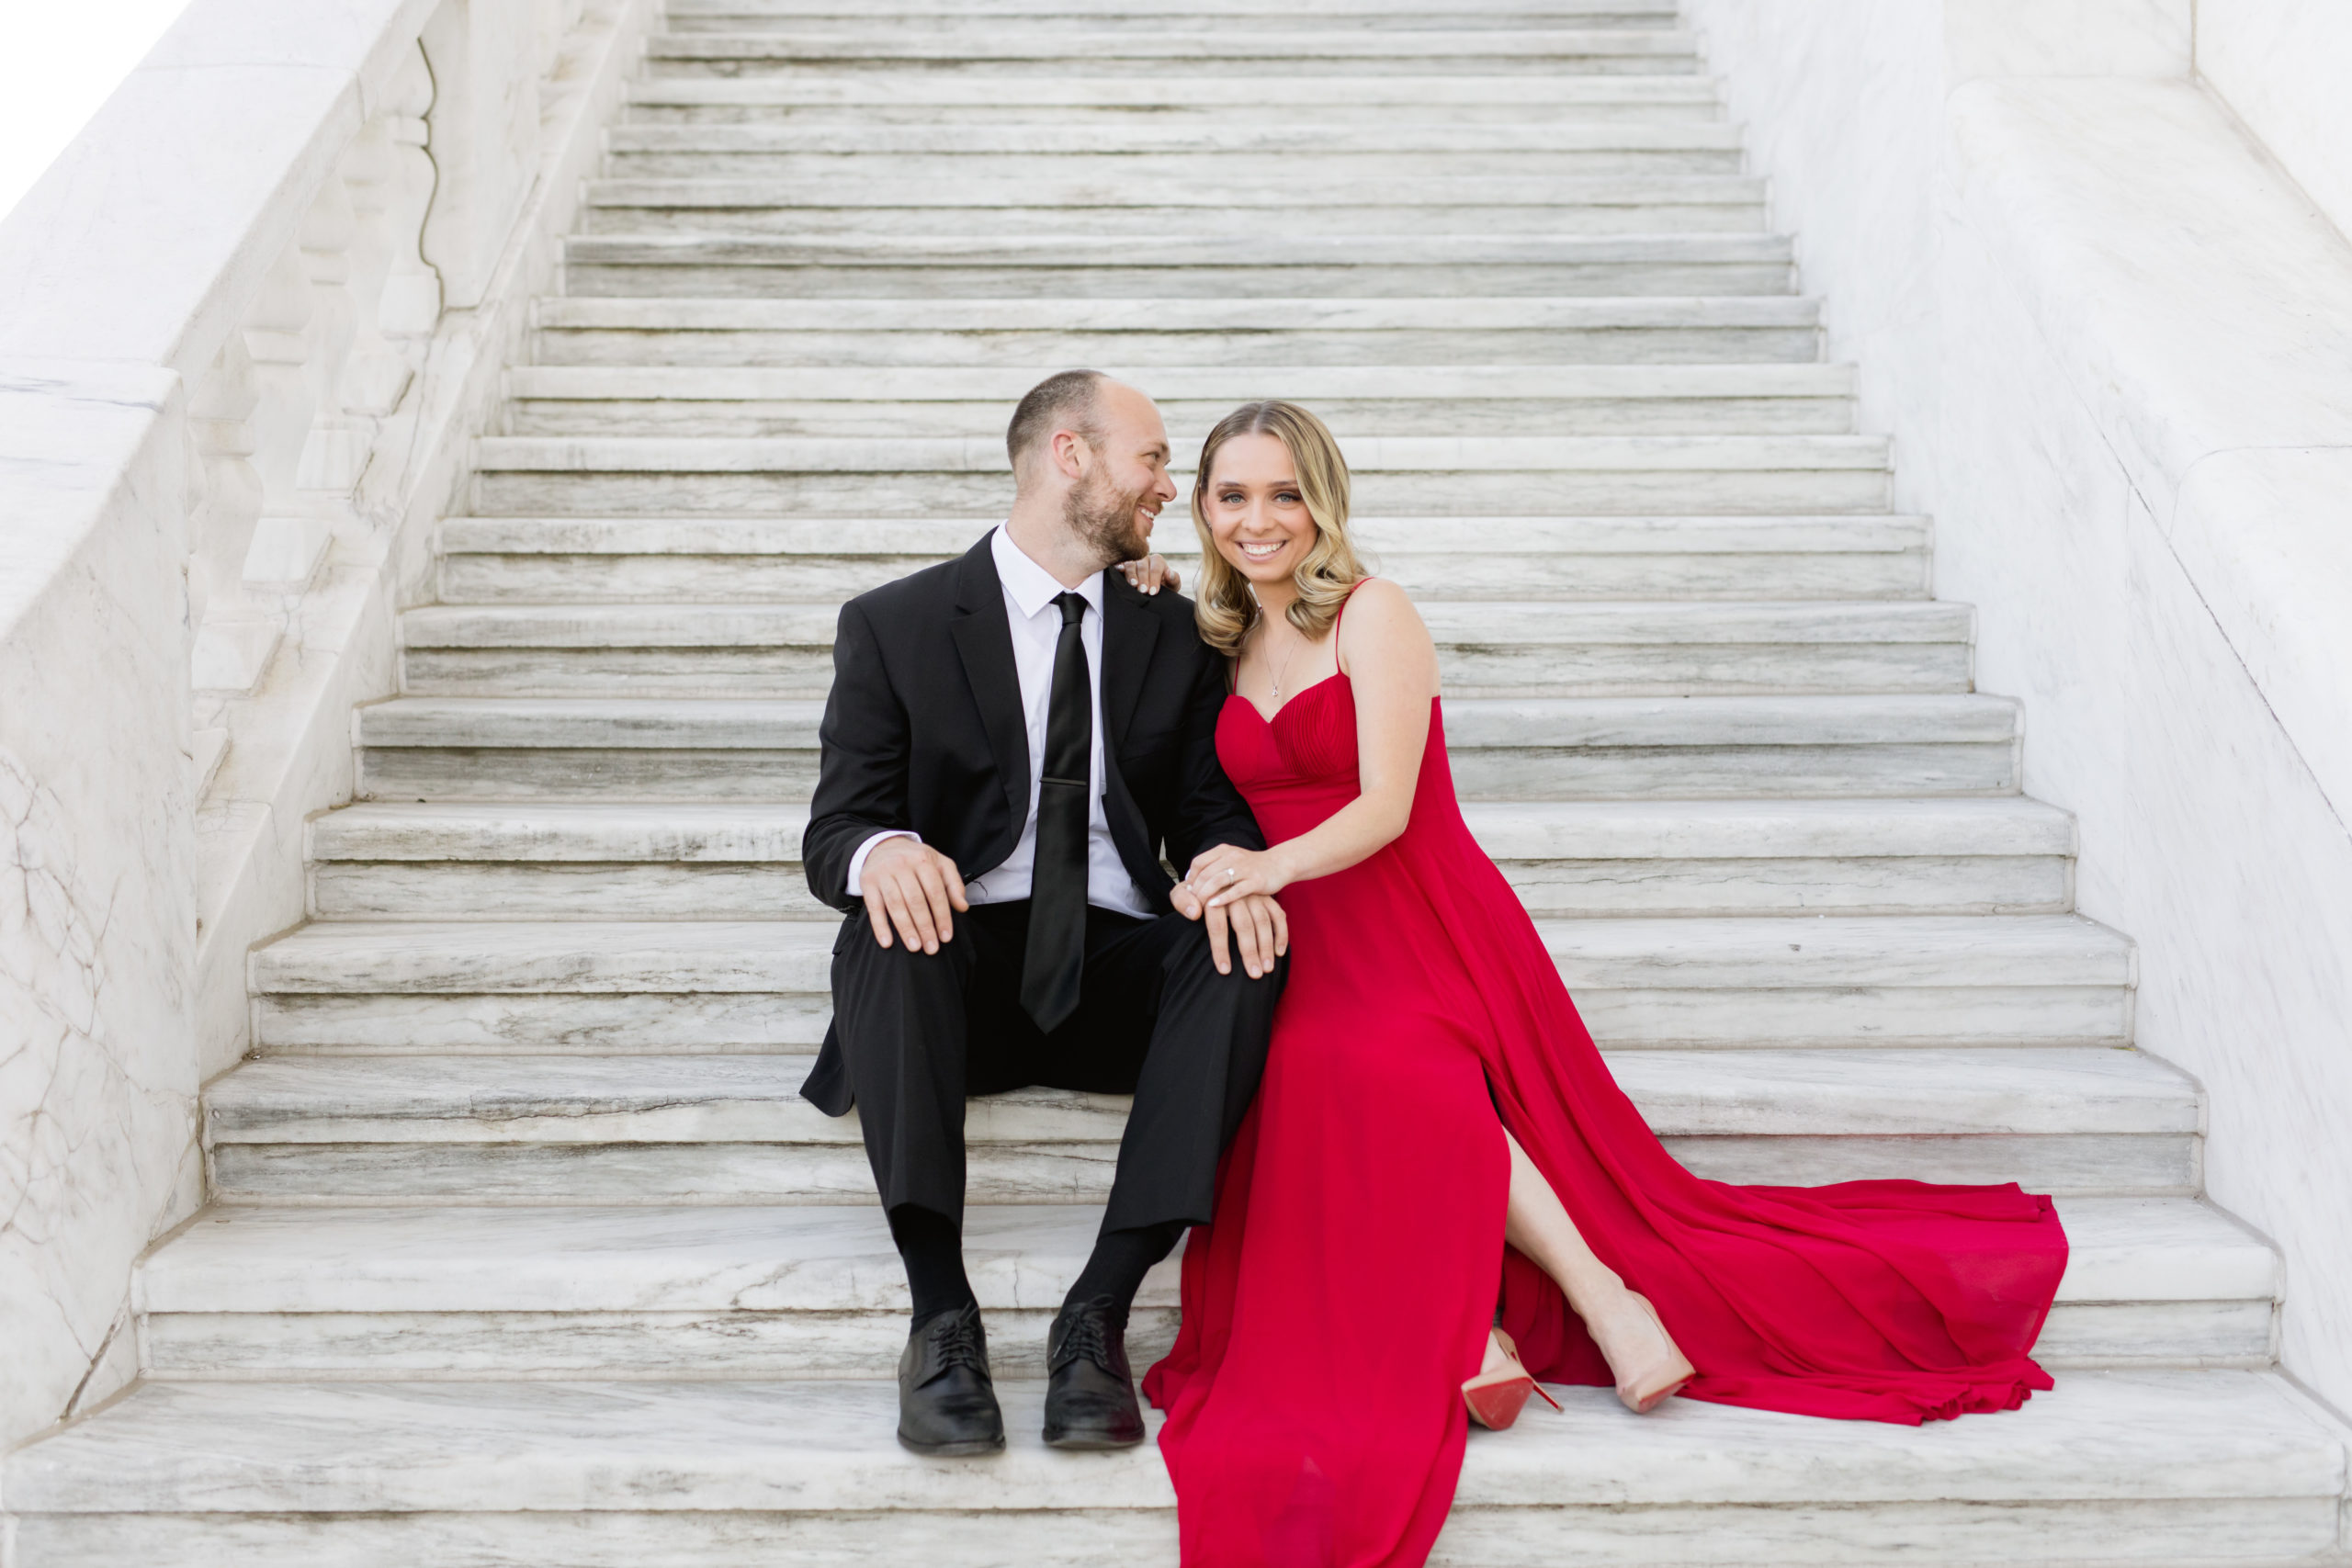 Elegant and classy engagement photos taken on marble staircase